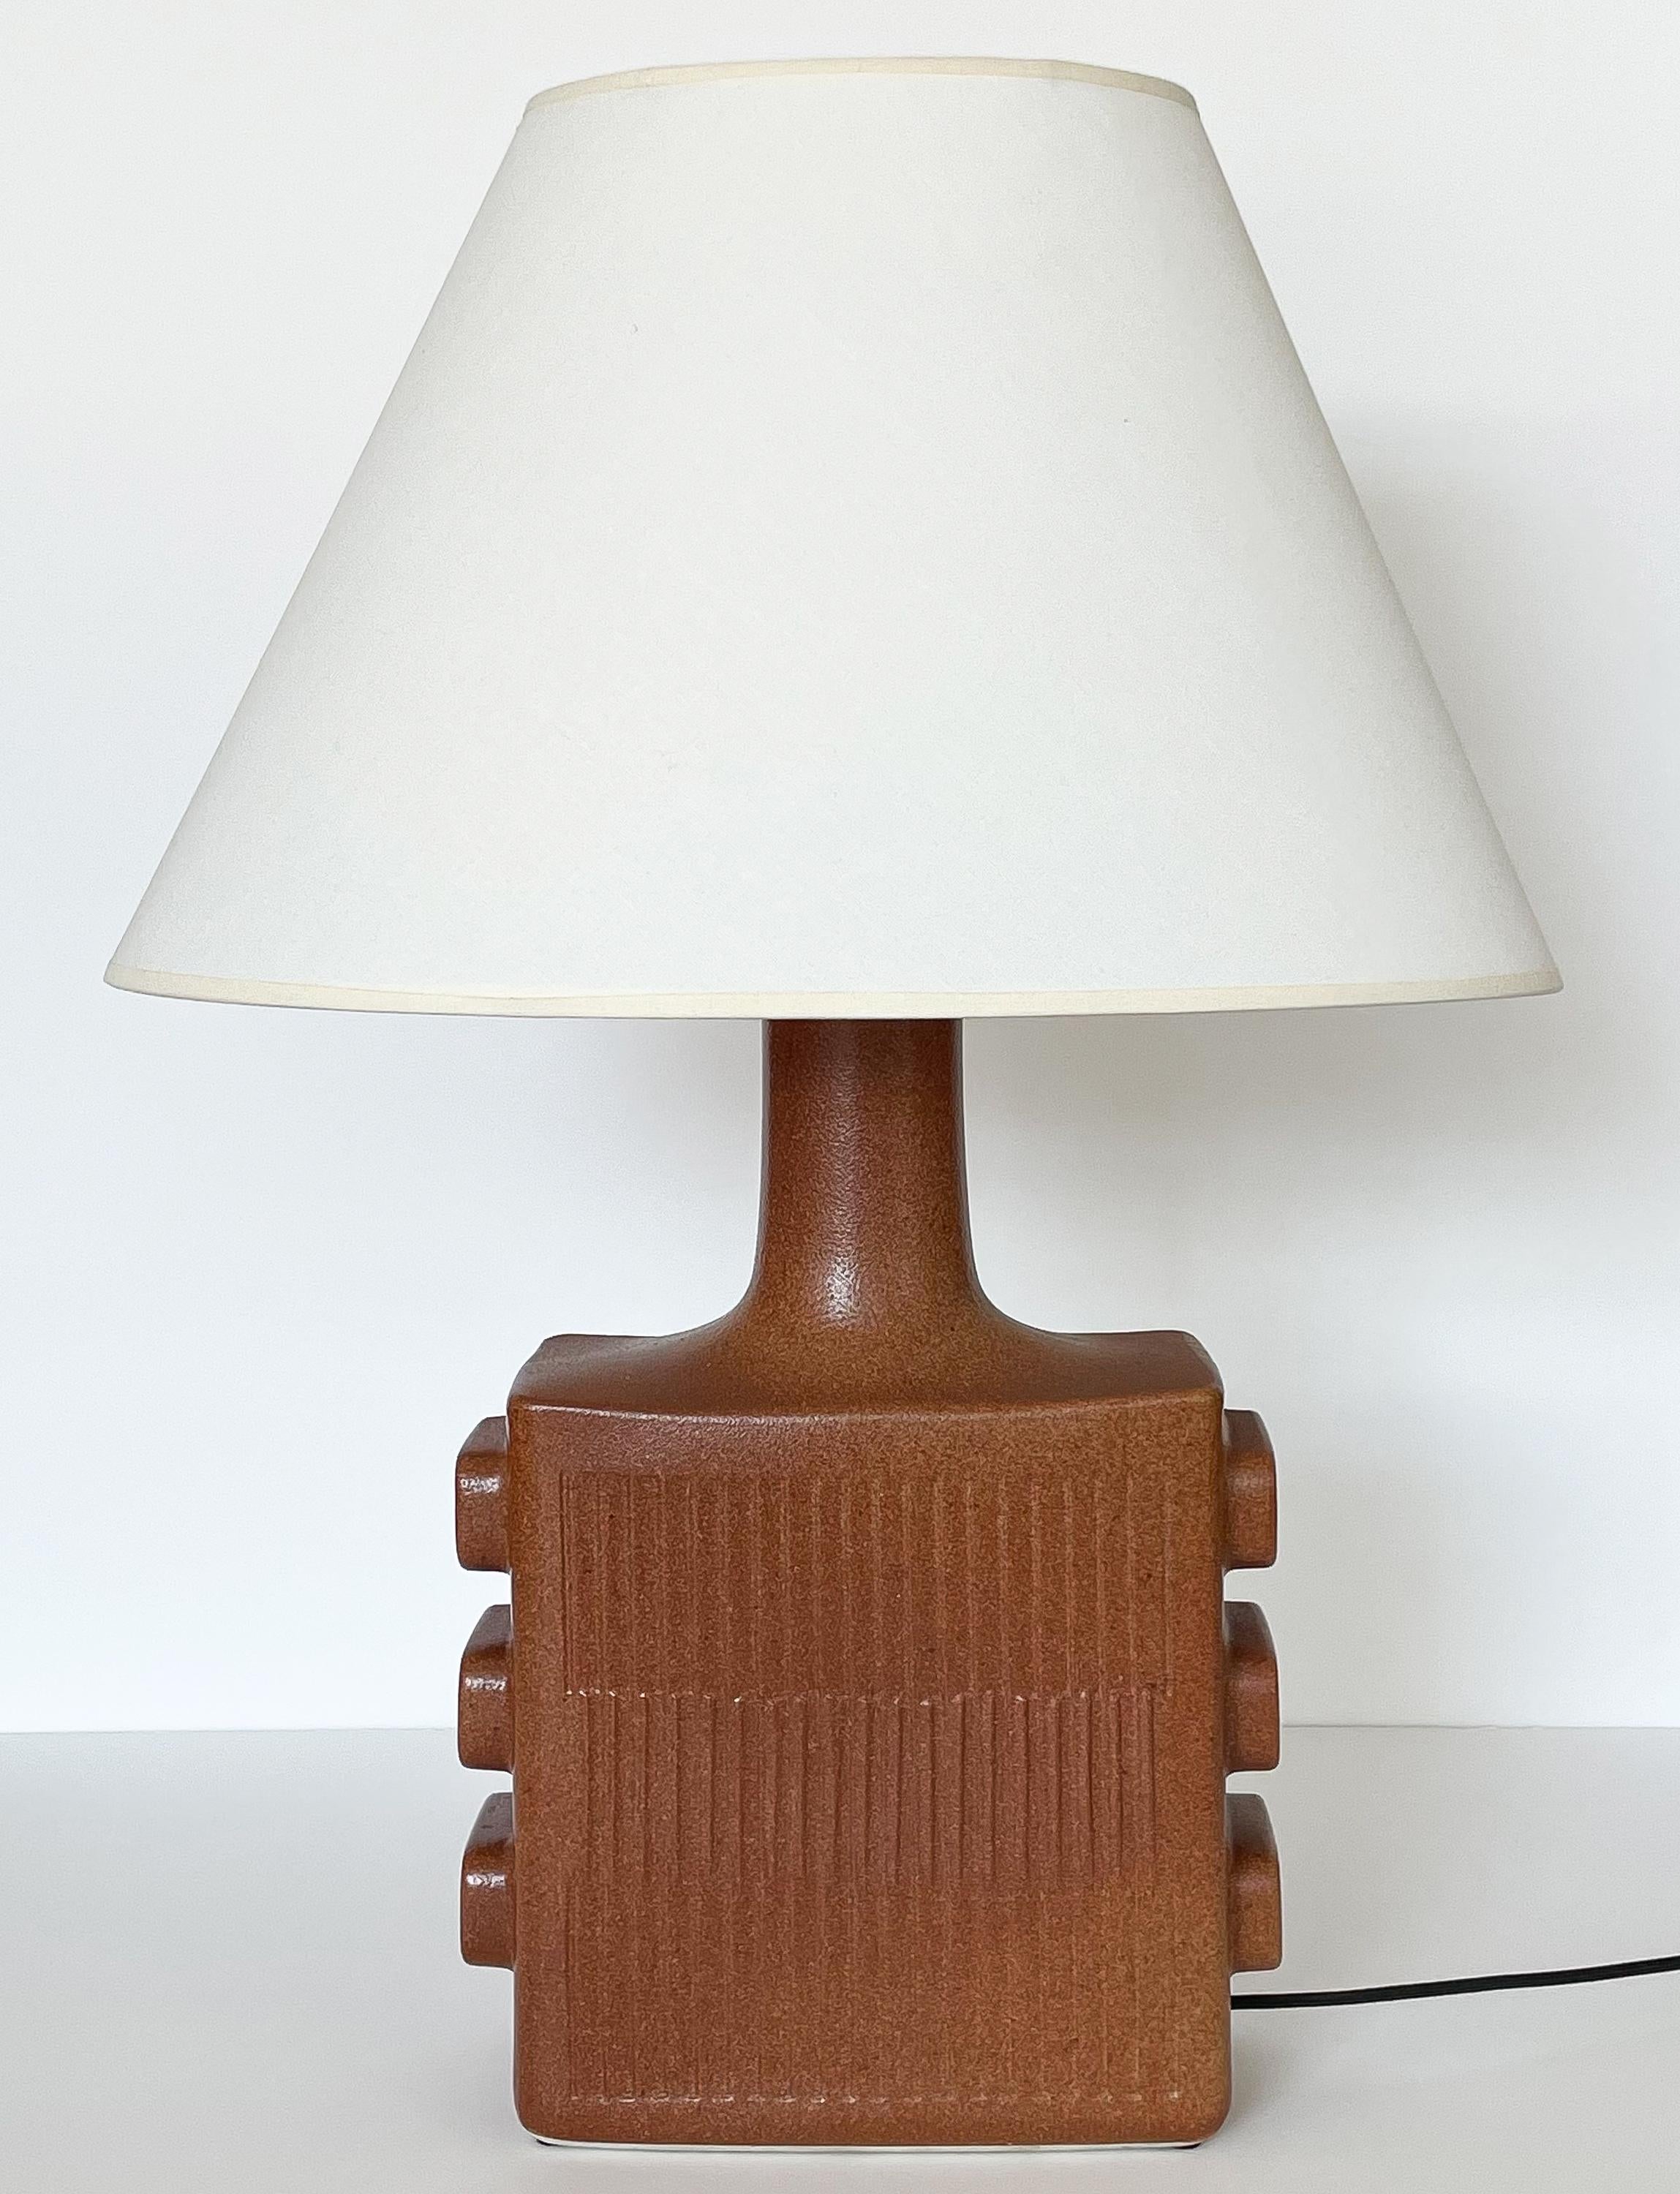 A uncommon sculptural ceramic table lamp by Lapid Pottery, Israel circa 1970s. This striking table lamp features a beautiful terracotta glaze over ceramic. The lamp has a vertical textured face and back with three rounded stylized rectangular